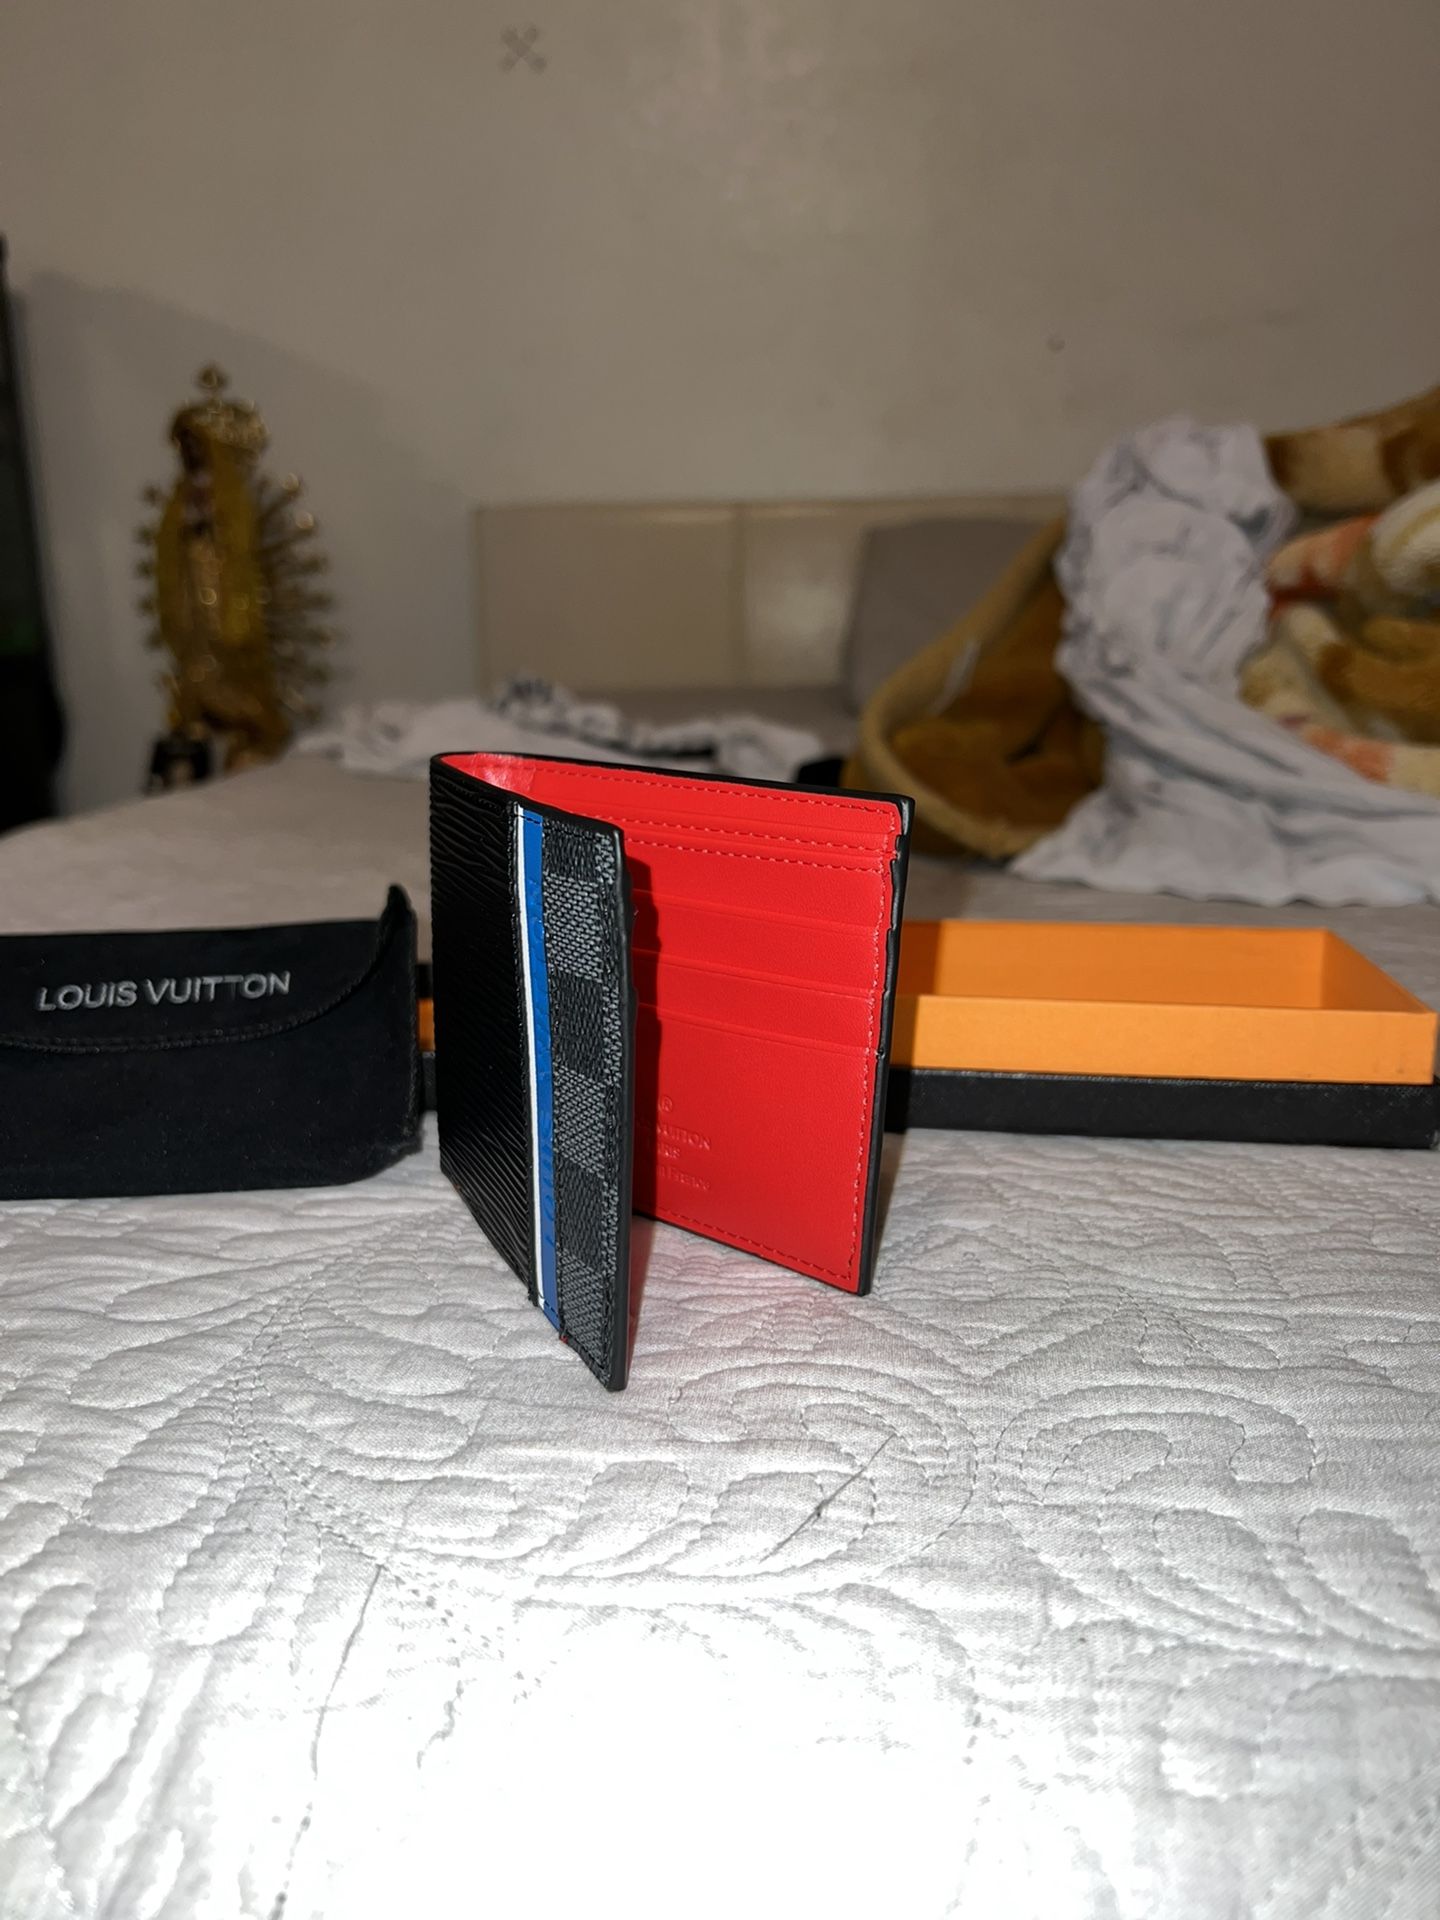 New Louis Vuitton Wallet  with box and Cloth  Esta cartera está nueva de Louis Vuitton Wallet 